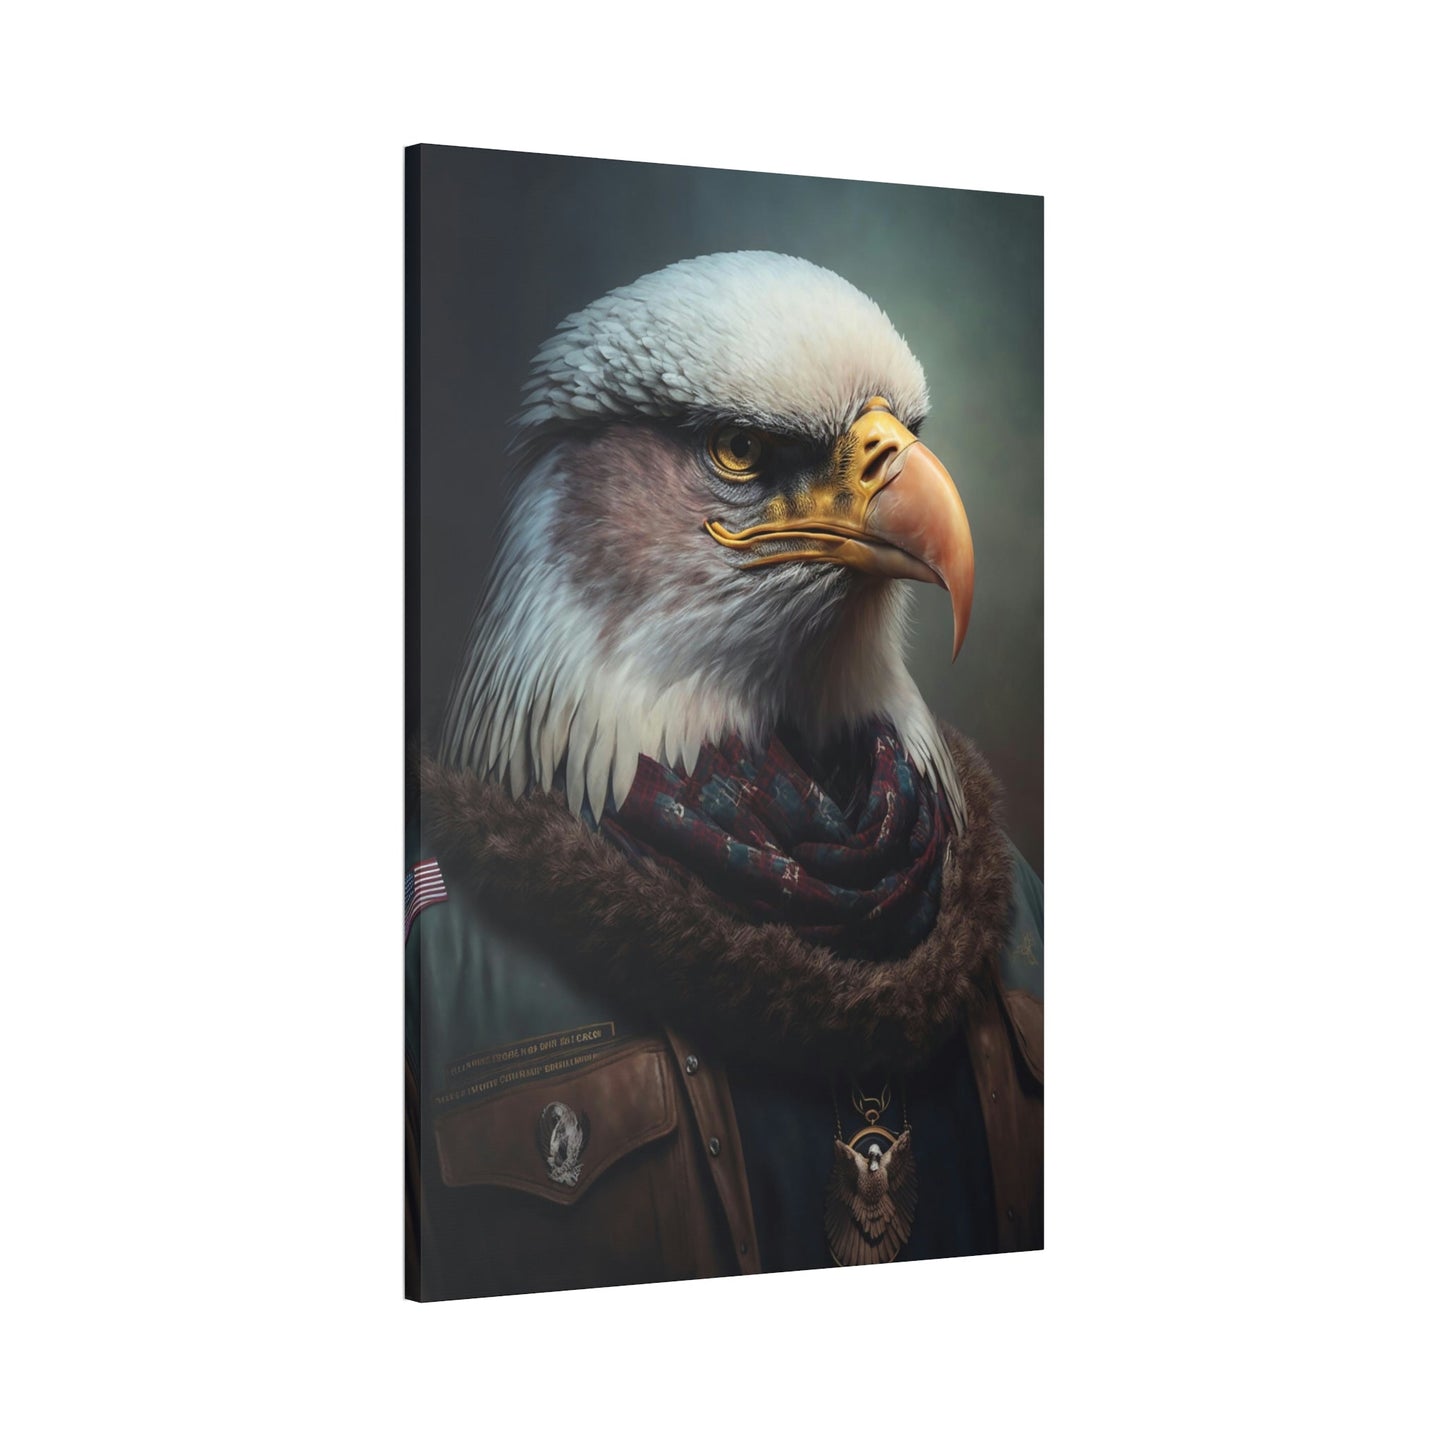 Ruler of the Skies: Framed Poster & Canvas Depicting the Regal Presence of Eagles